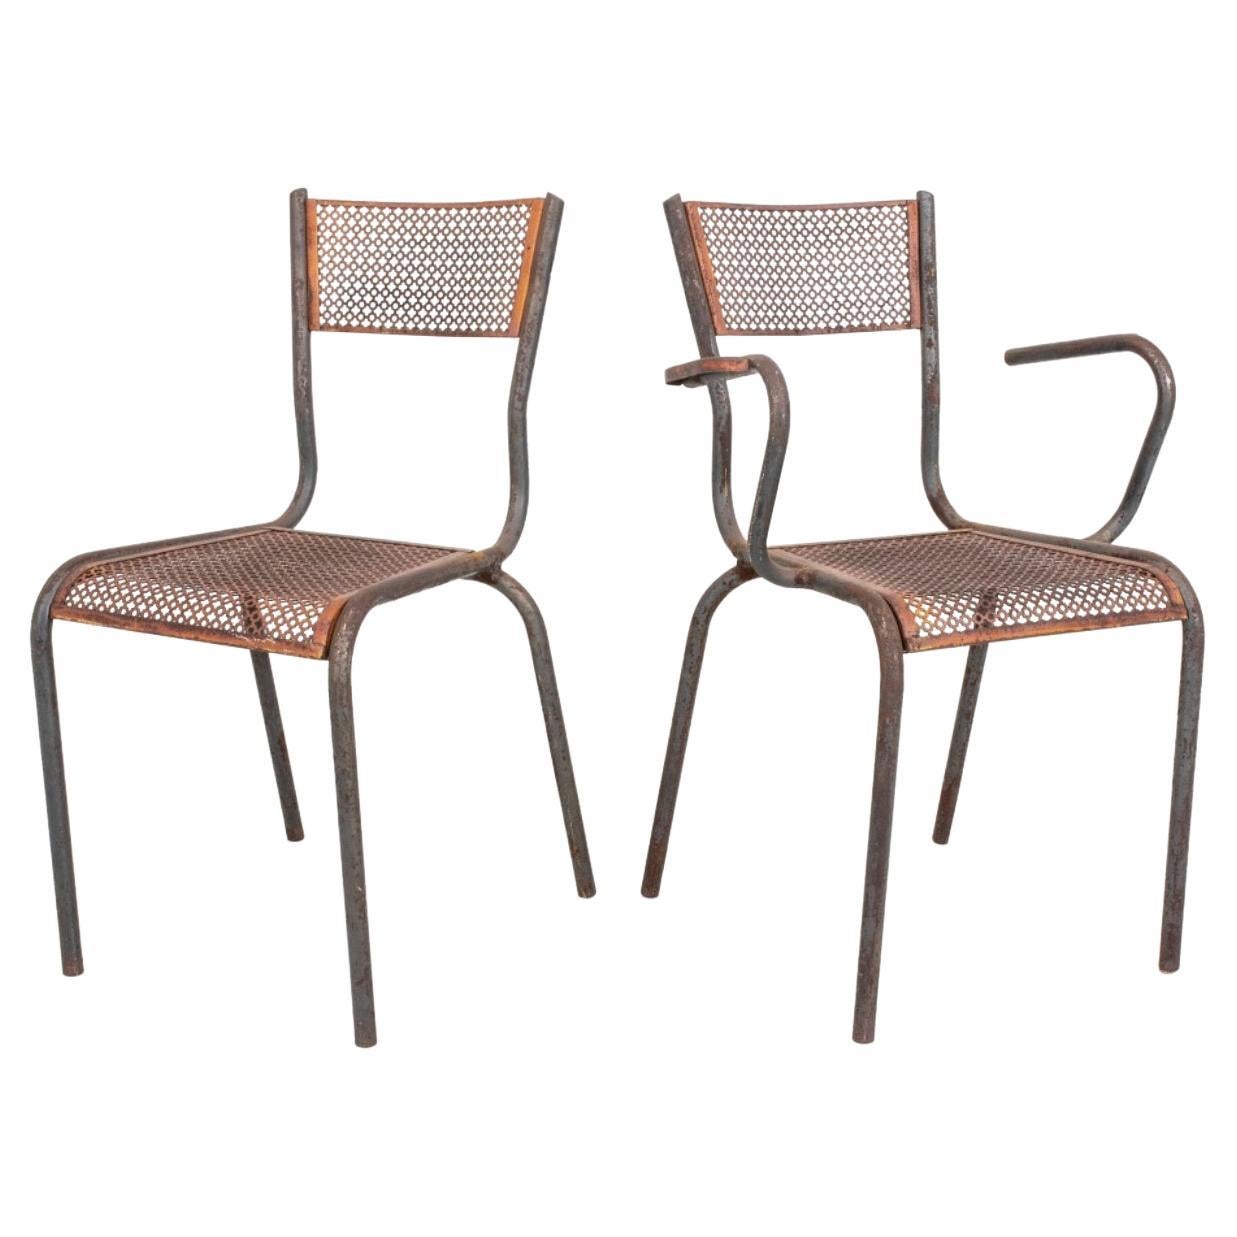 Mathieu Mategot French Modernist Side Chairs, Pair